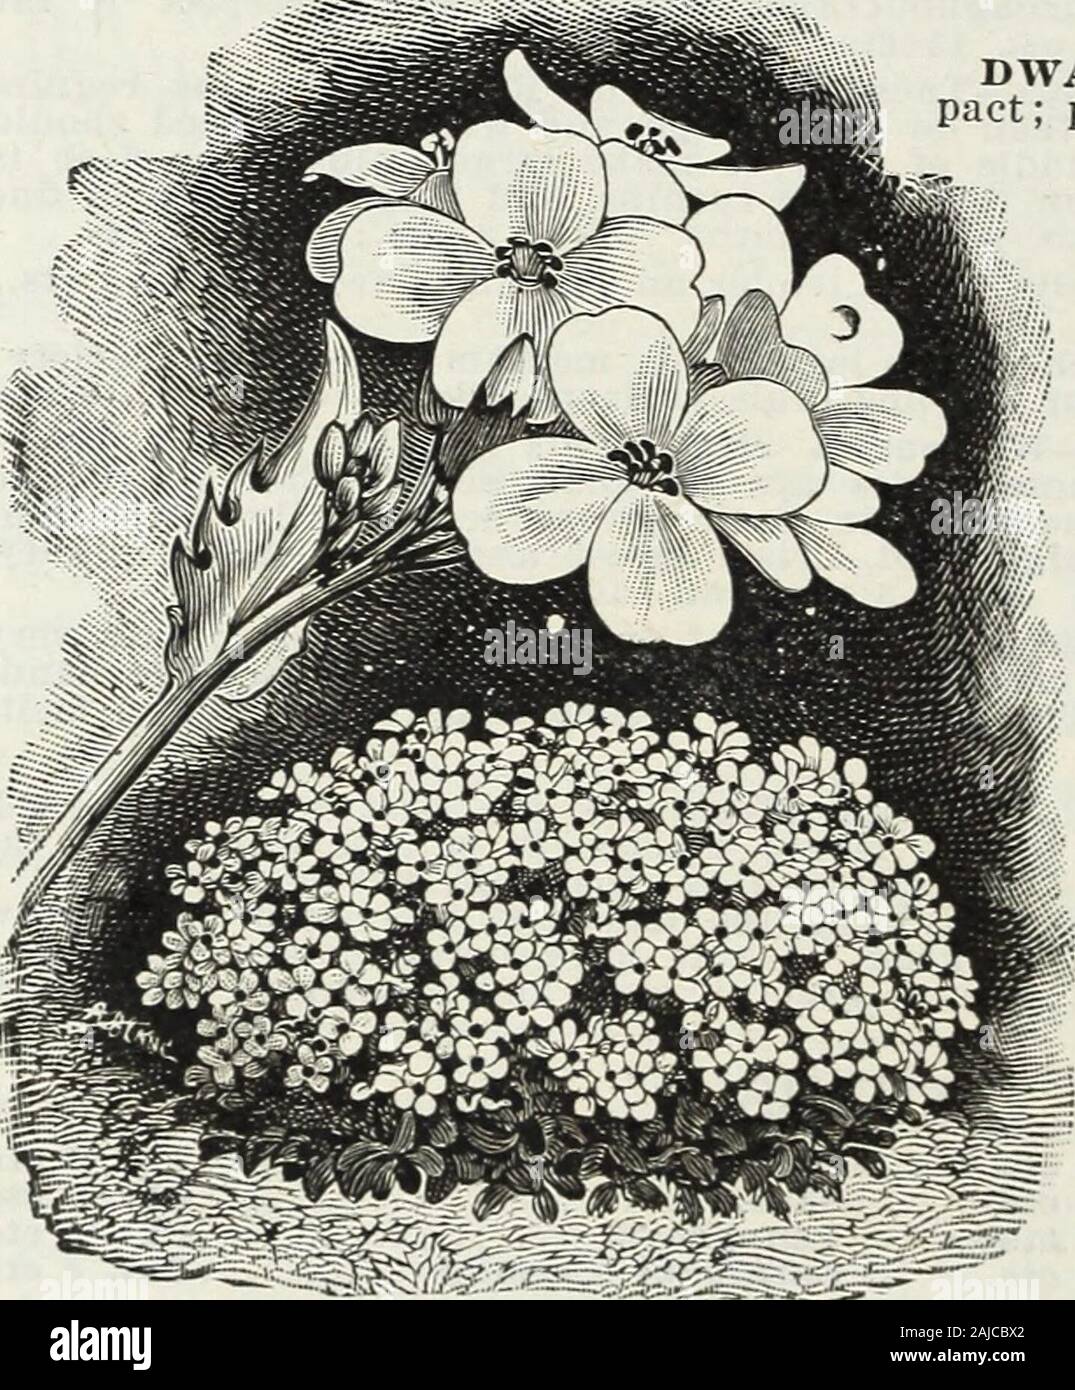 Lippincott seeds : 1914 . more brilliant varieties. I offer seed of the new ImperialDark Blue as the best and most showy. Pkt., 300 seeds, 4 cts. AGERATUM. DWARF WHITE—Very dwarf and com-pact; pure white. Pkt., 300 seeds, 4 cts. ACHILLEA. THE PEARL—One of the besthardy white perennials in thelist. Grows about two teei high,and from spring till frost iscovered with heads of pure whitedouble flowers. A grand plantfor cemetery decoration. Easily frown from seed, flowering therst season if sown early. Pkt.,300 seeds, 5 cts. ARABIS ALPINA. The pure white flowers growso uniformly and thickly thatit Stock Photo